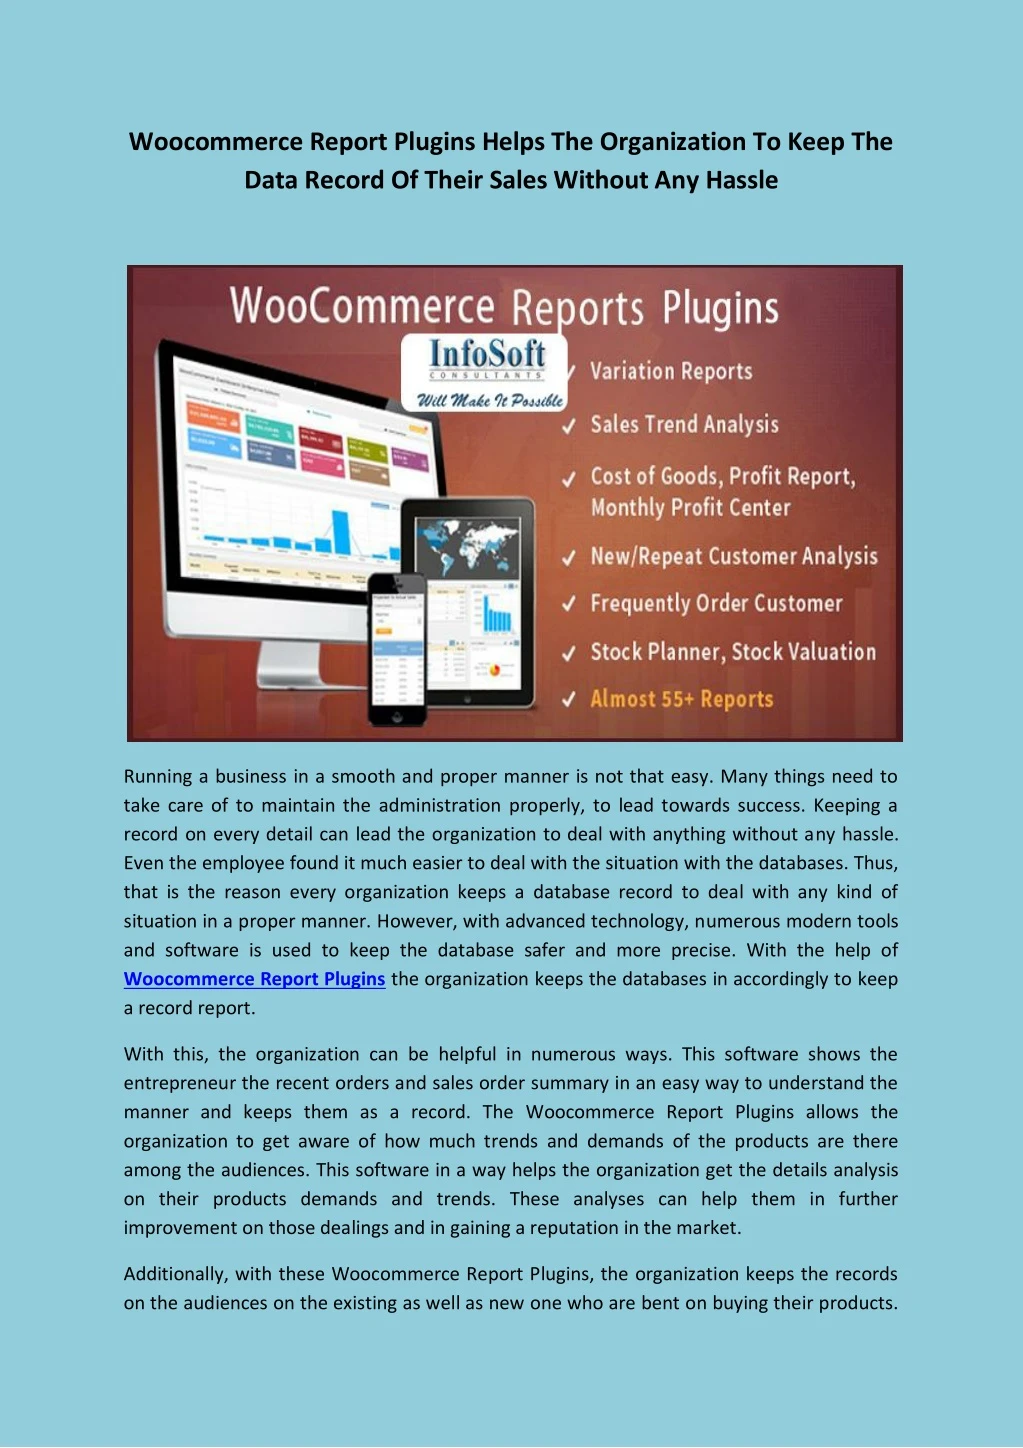 woocommerce report plugins helps the organization